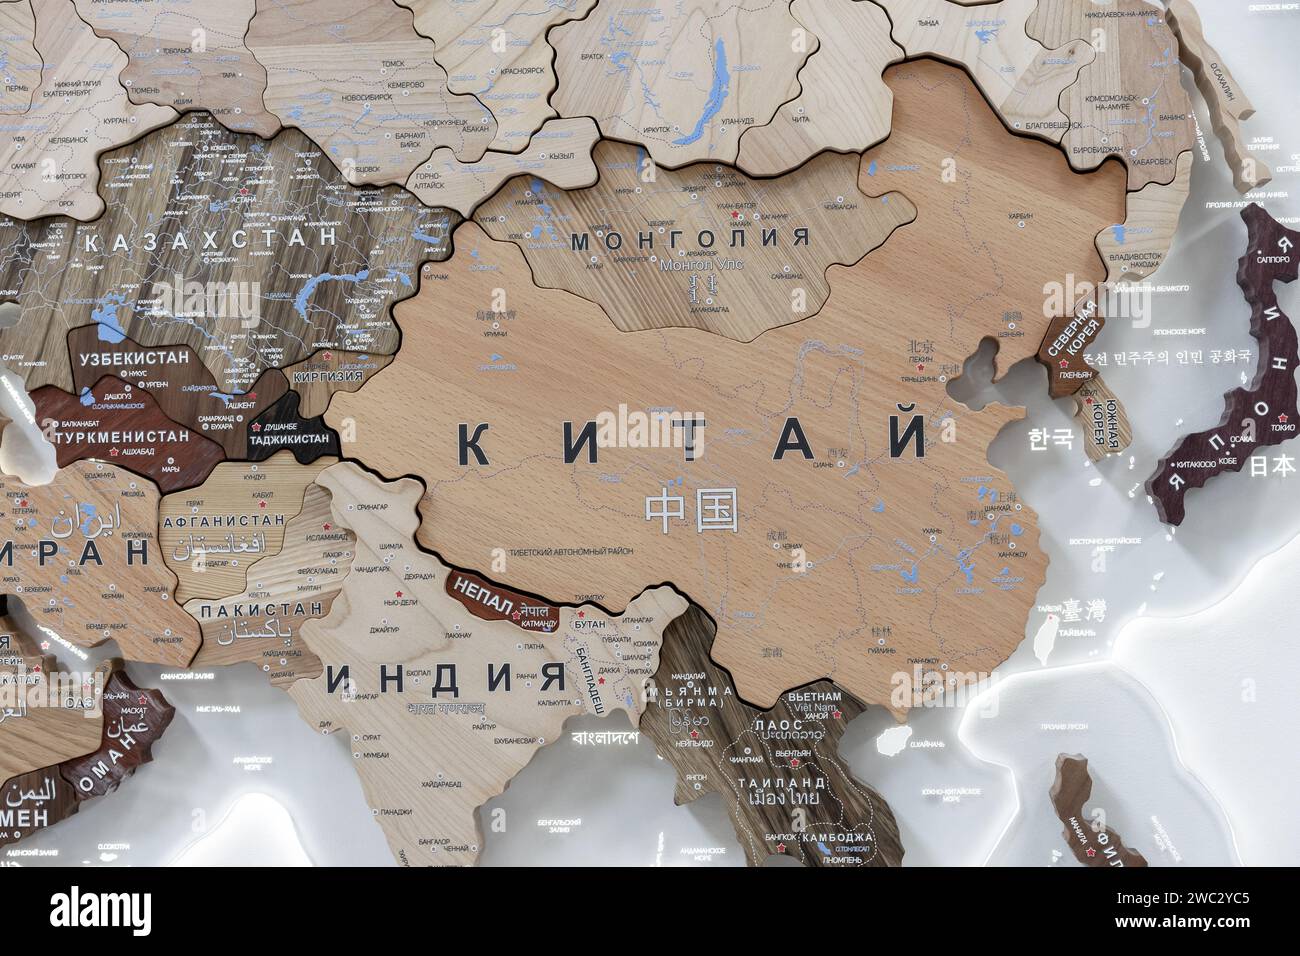 Wooden map of China and neighboring countries, names of countries in Russian. Map for trip planning. Stock Photo